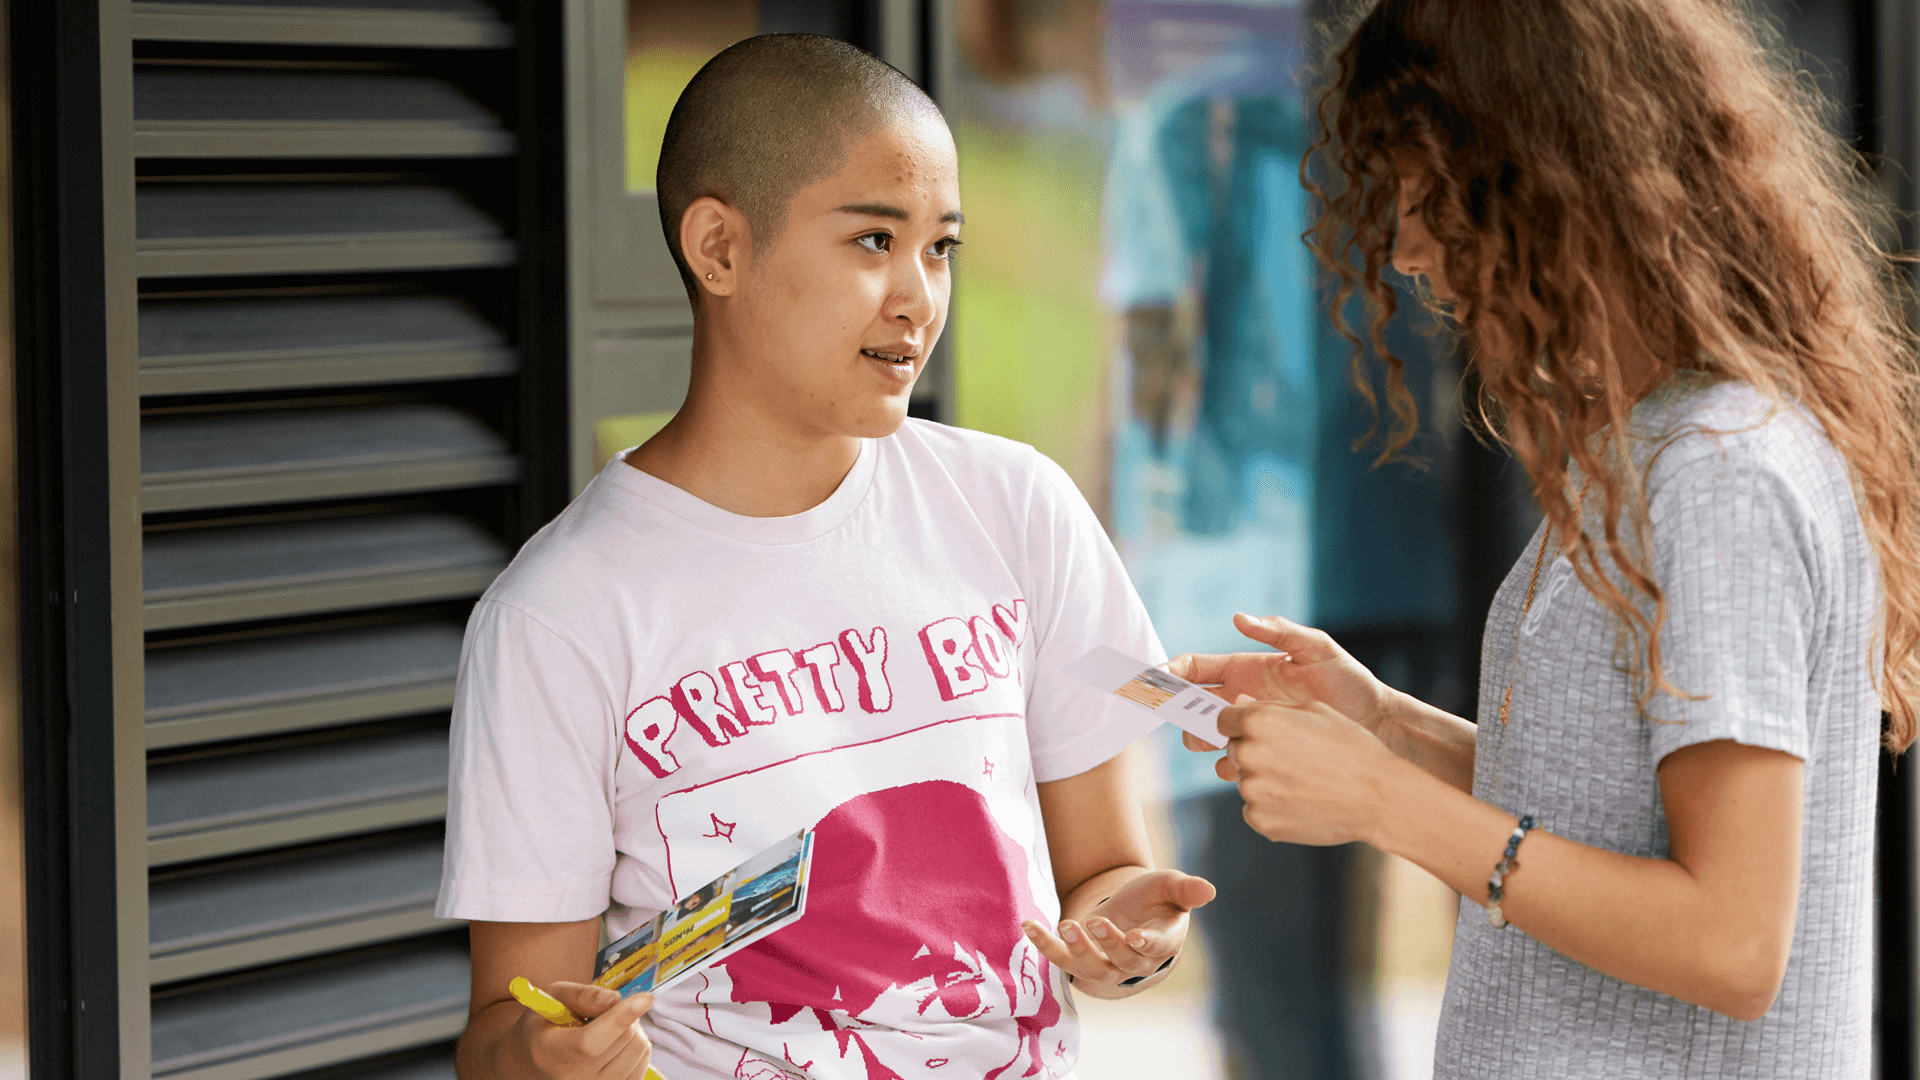 medium-shot-of-a-young-woman-with-shaved-head-holding-some-flyers-talking-to-another-girl-with-curly-hair-and-face-unseen-inside-campus